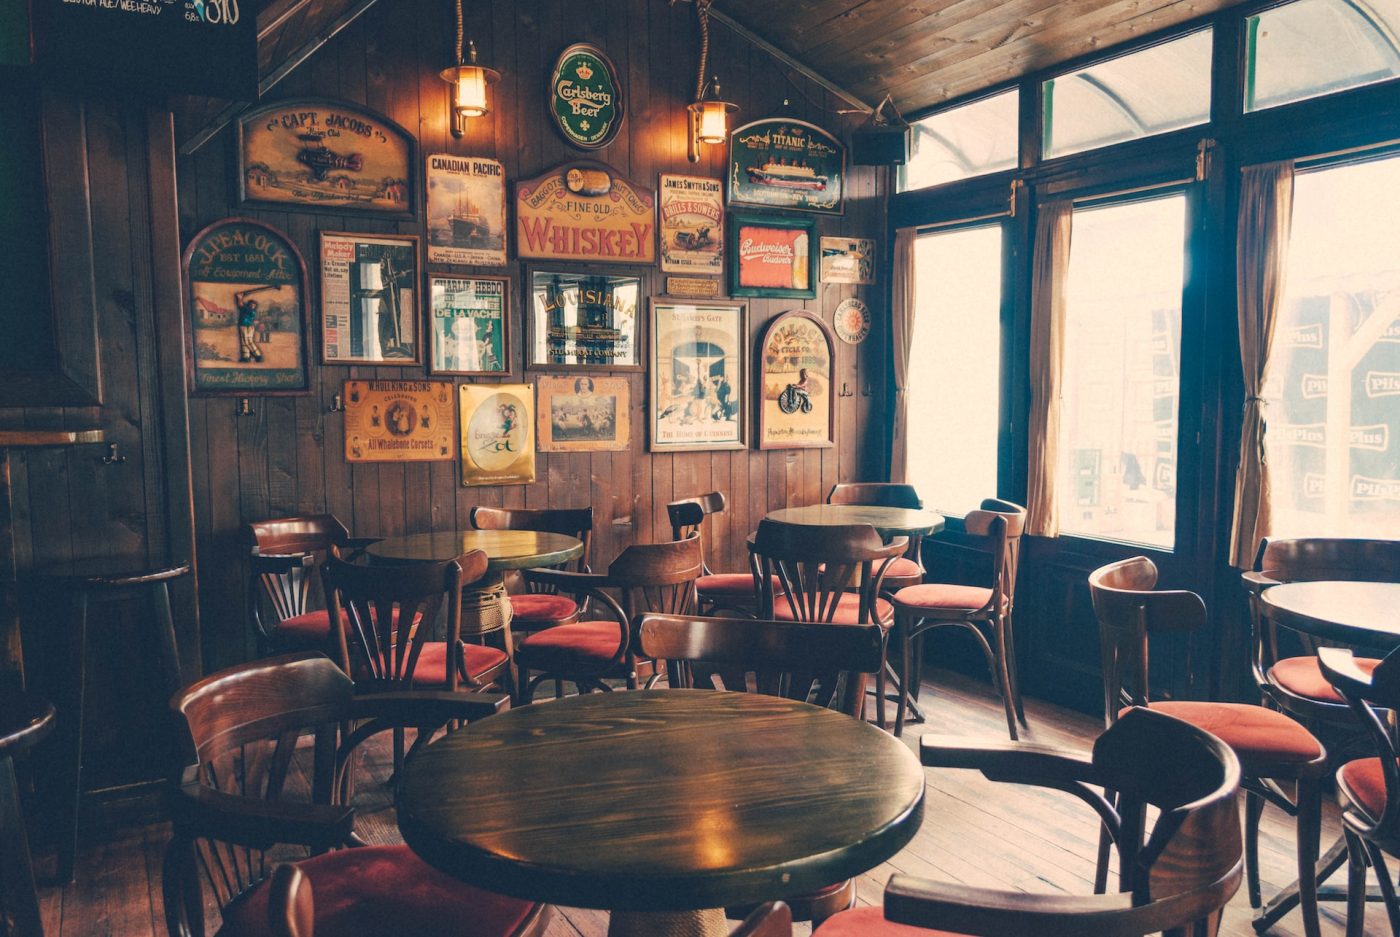 stock photo of the inside of a pub.